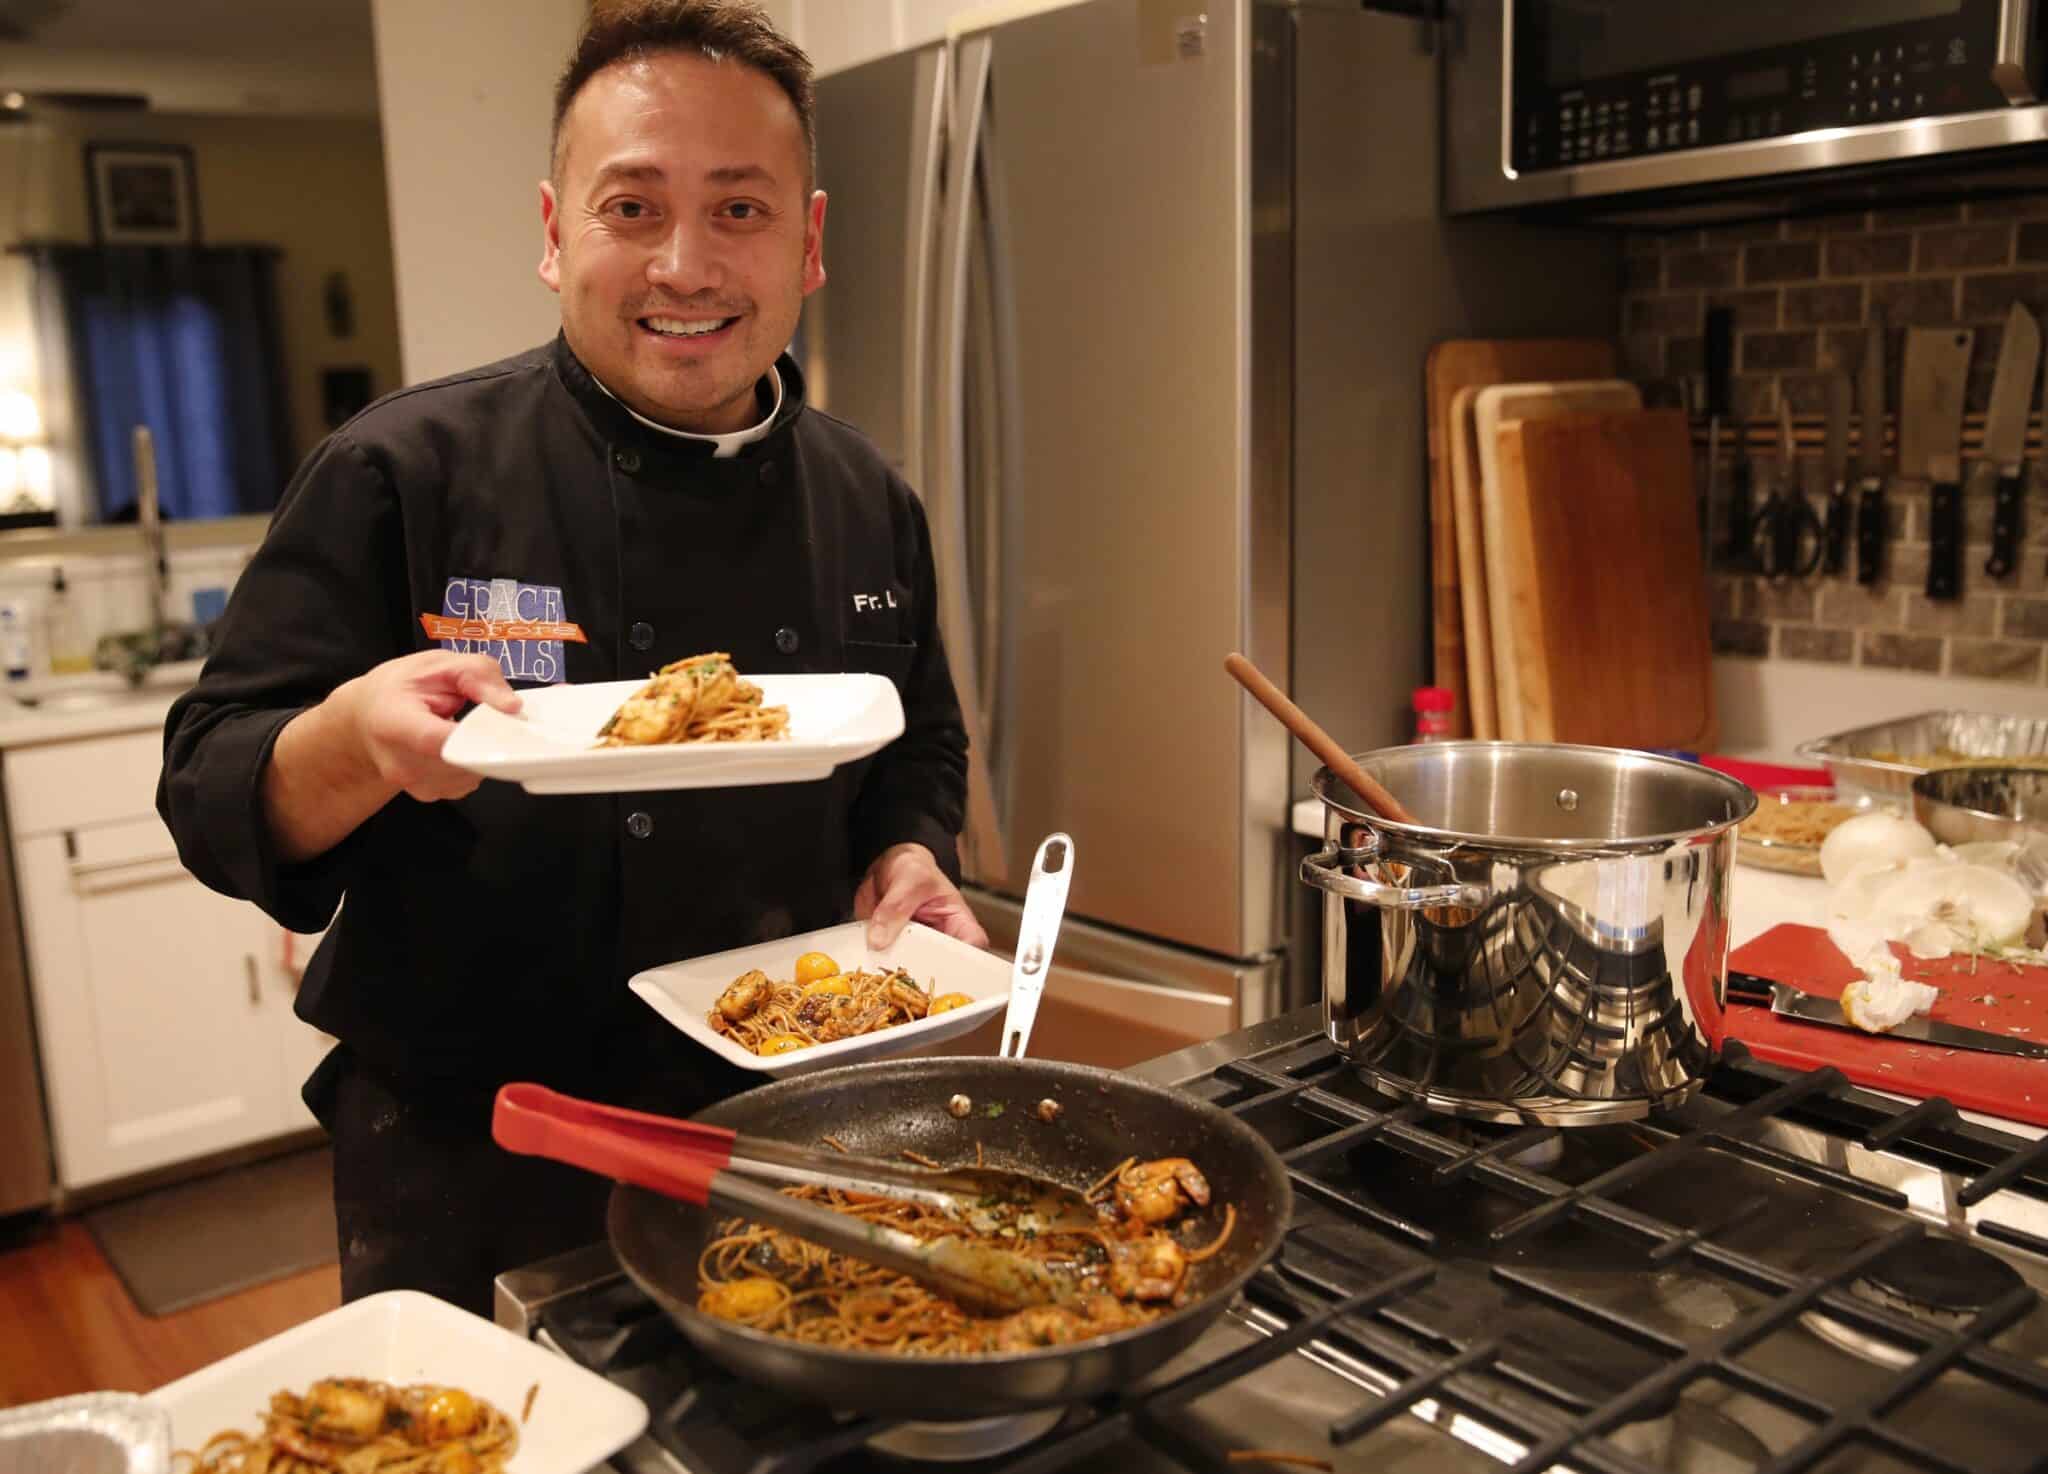 Celebrity chef Father Leo Patalinghug displays a Lenten seafood pasta meal he prepared in his Baltimore kitchen Feb. 24, 2016. During a Nov. 22, 2019, session at the National Catholic Youth Conference in Indianapolis, Father Patalinghug, better known as the "the cooking priest," provided a different kind of recipe, "Five Steps to Become a Teenage Saint," to help youths get to heaven. (CNS photo/Chaz Muth)